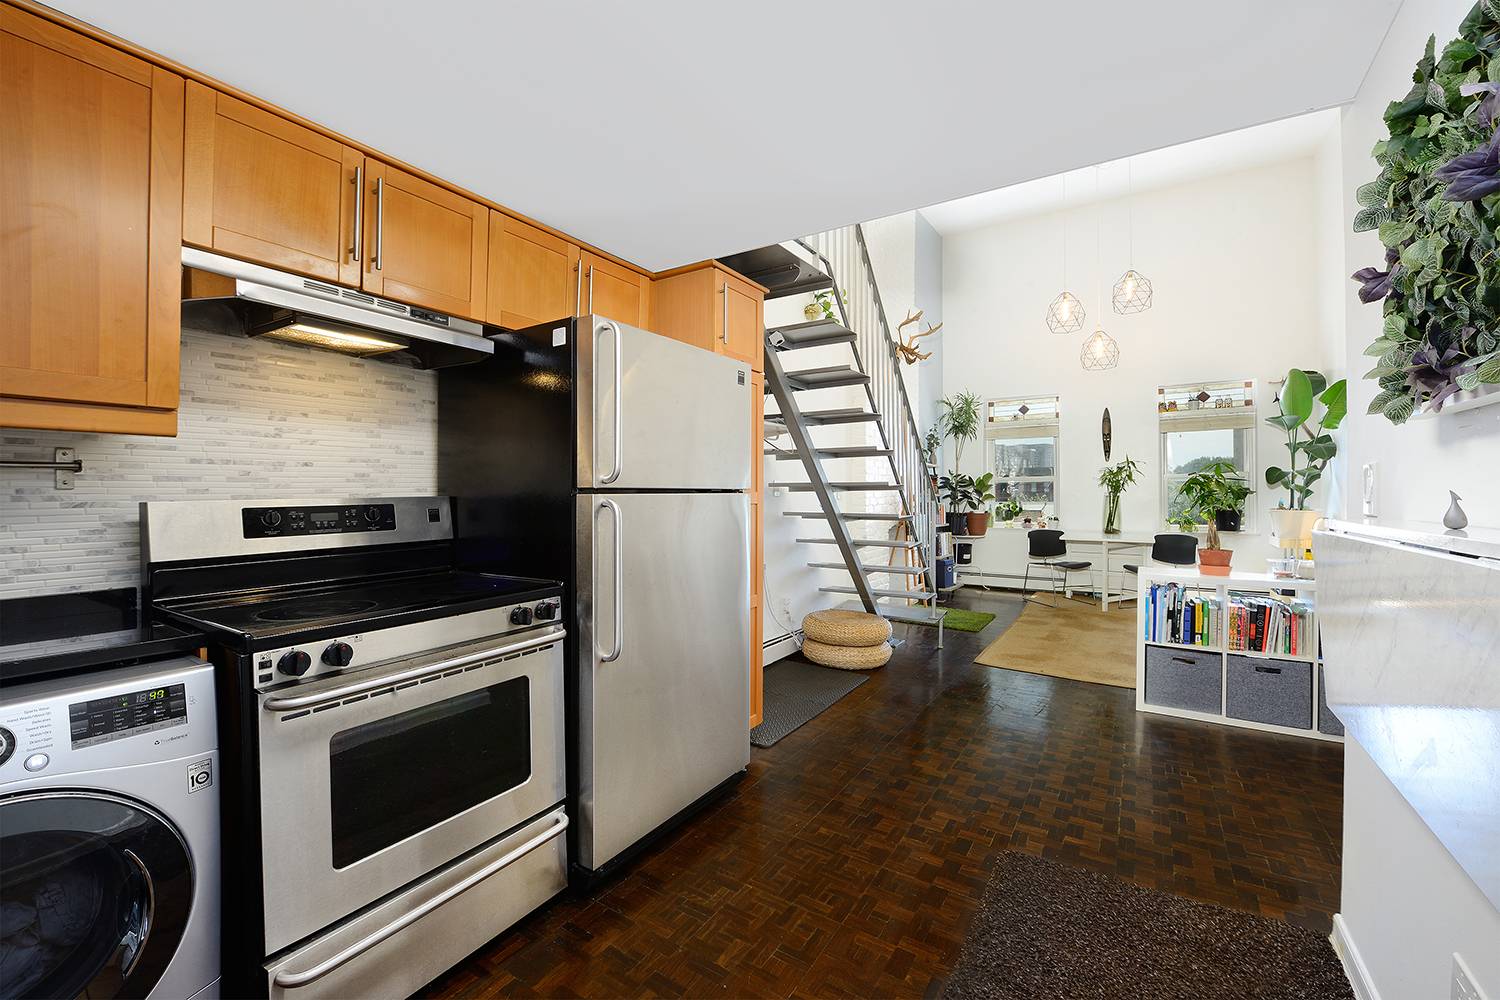 Newly Renovated 2 Bedroom Loft Style Condo with Soaring 16 ft. Ceilings